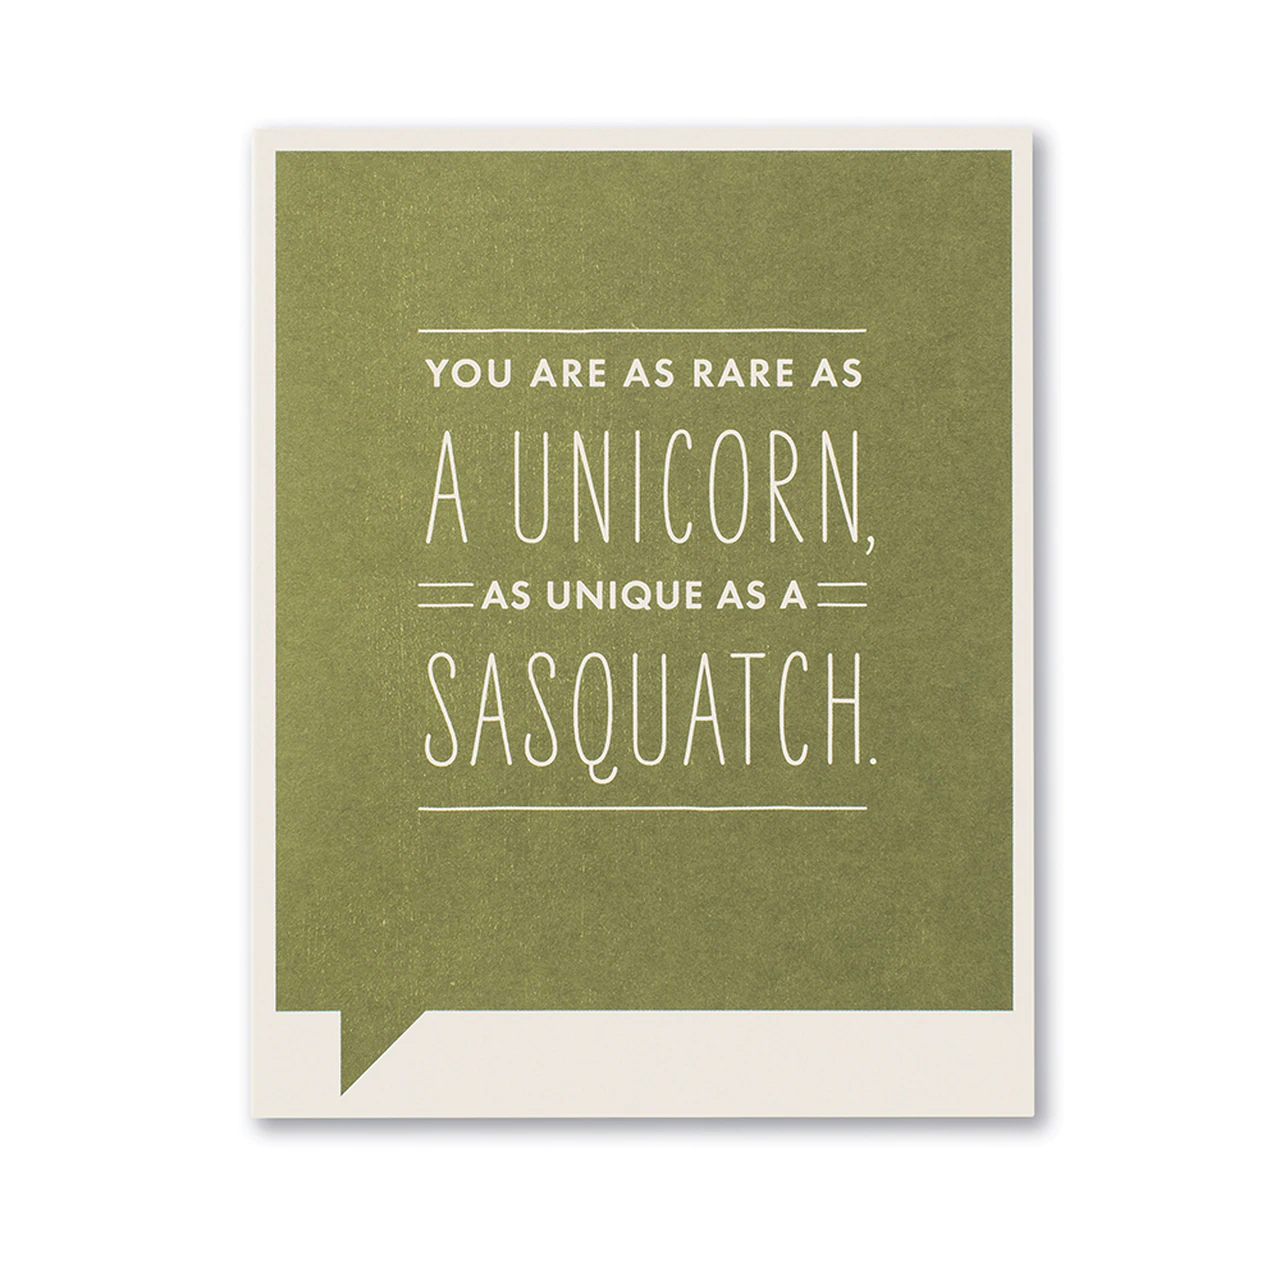 Thank You Greeting Card - You are as Rare as a Unicorn